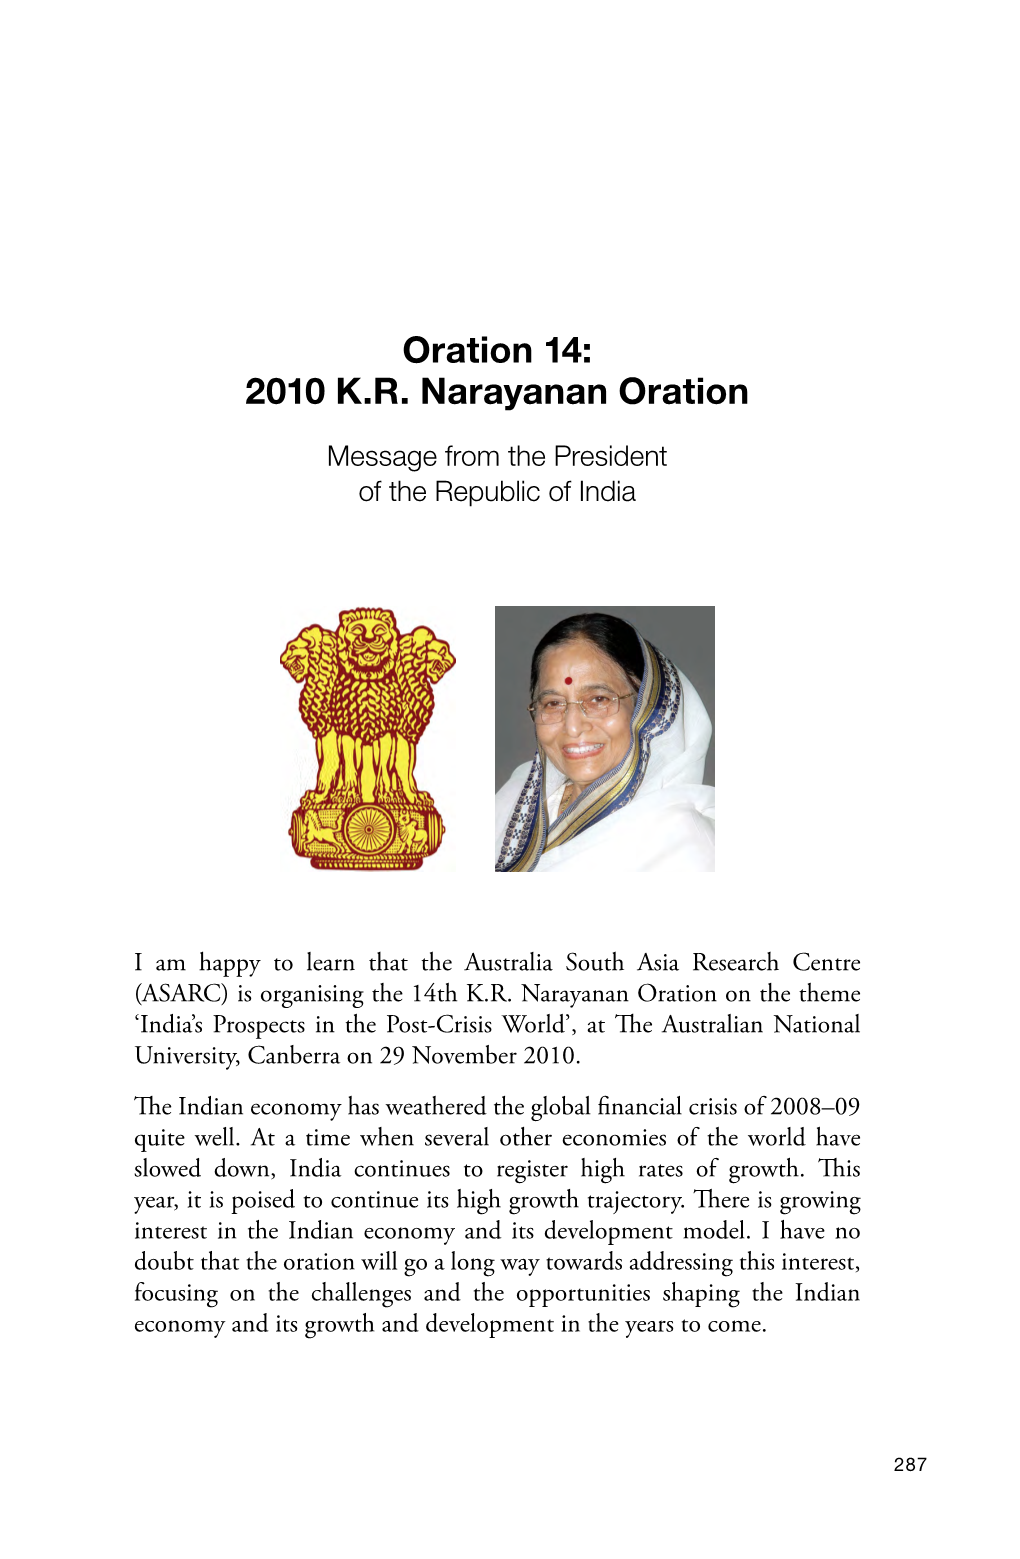 2010 KR Narayanan Oration – India's Prospects in the Post